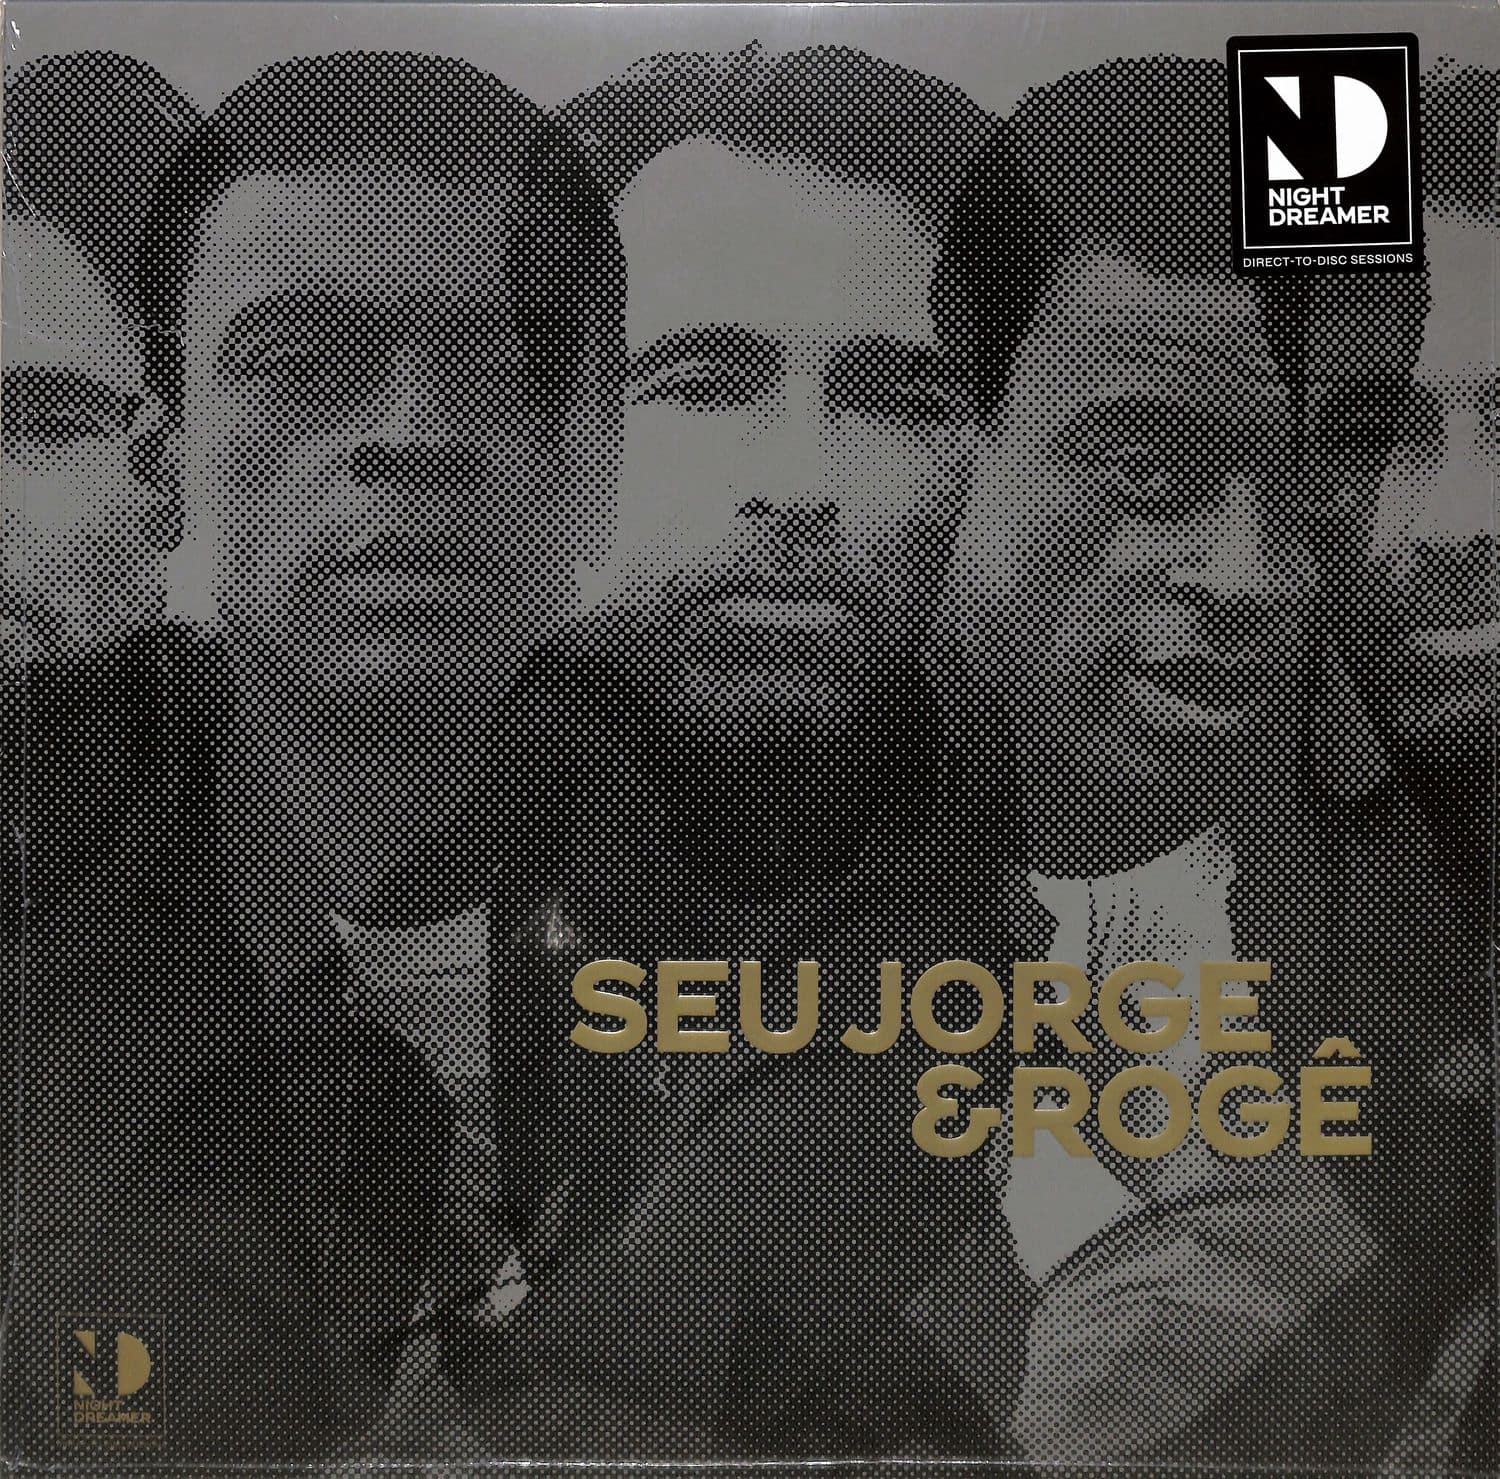 Seu Jorge & Roge - DIRECT TO DISC SESSIONS 